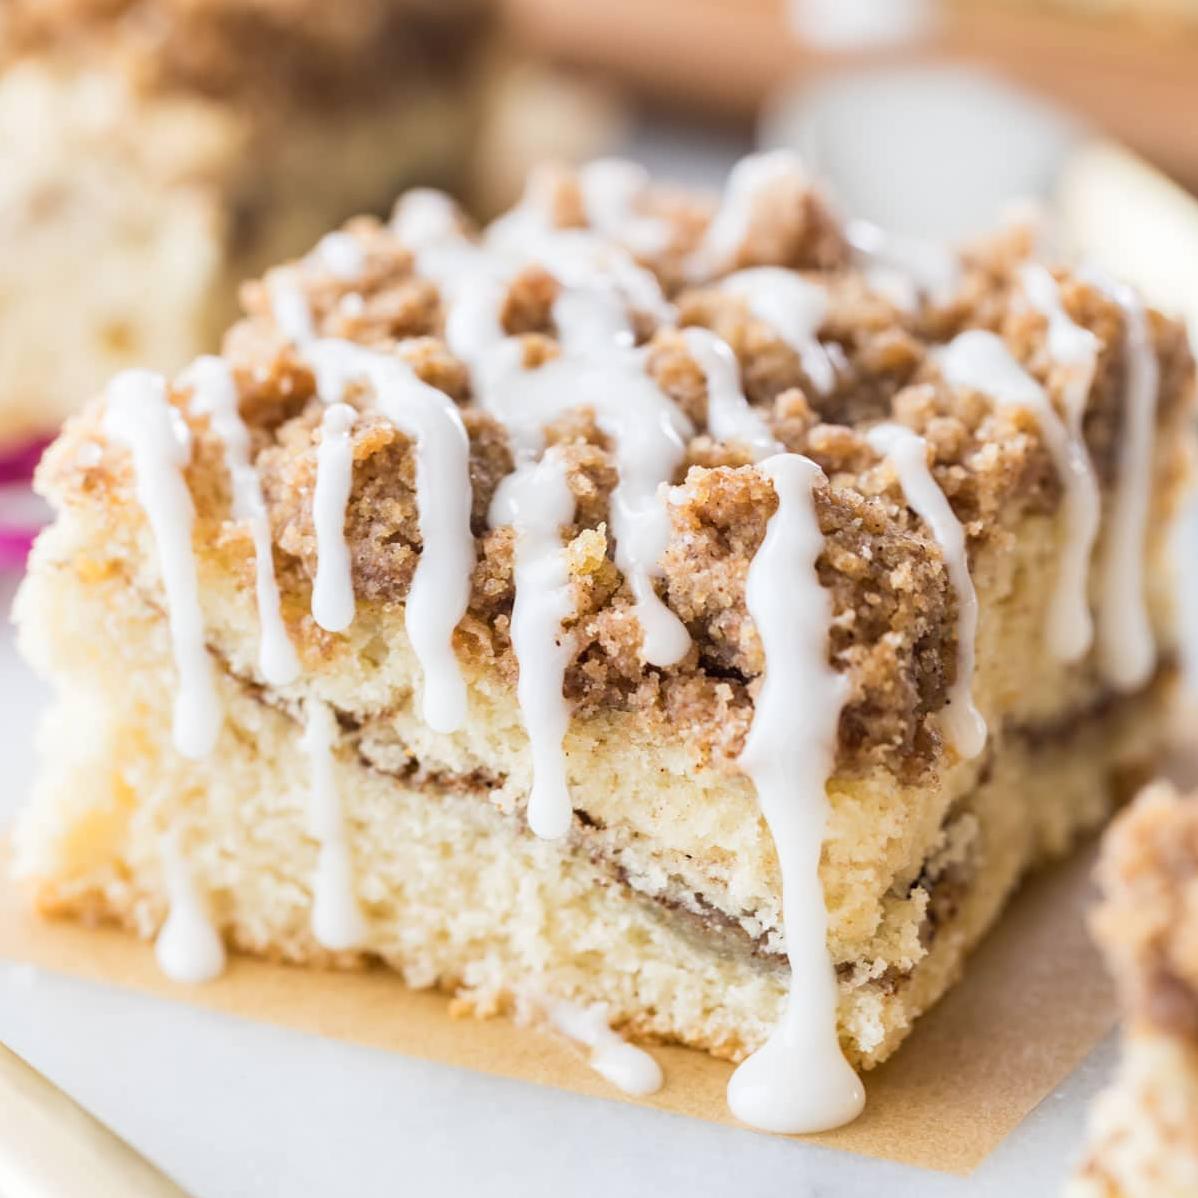  You won't be able to resist the crumbly topping of this coffee cake